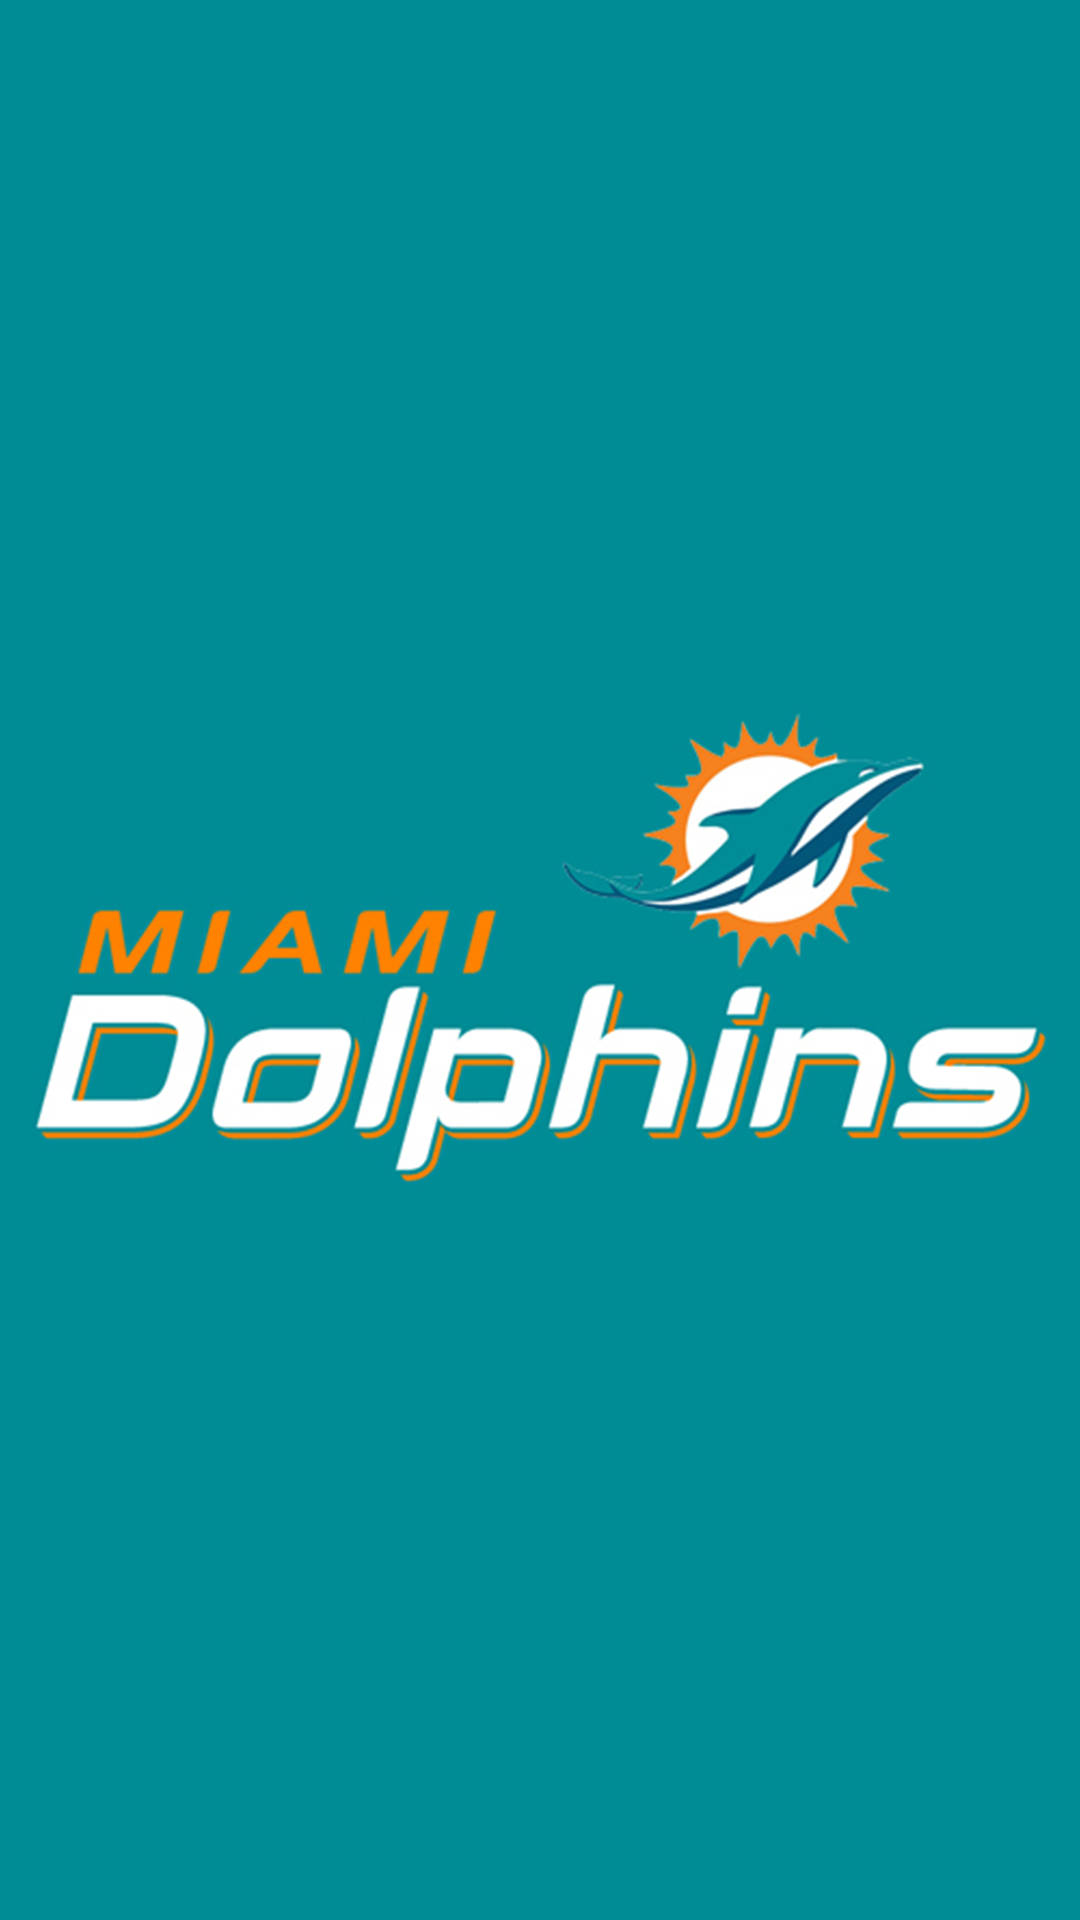 Show your Miami Dolphins pride with this smartphone wallpaper Wallpaper